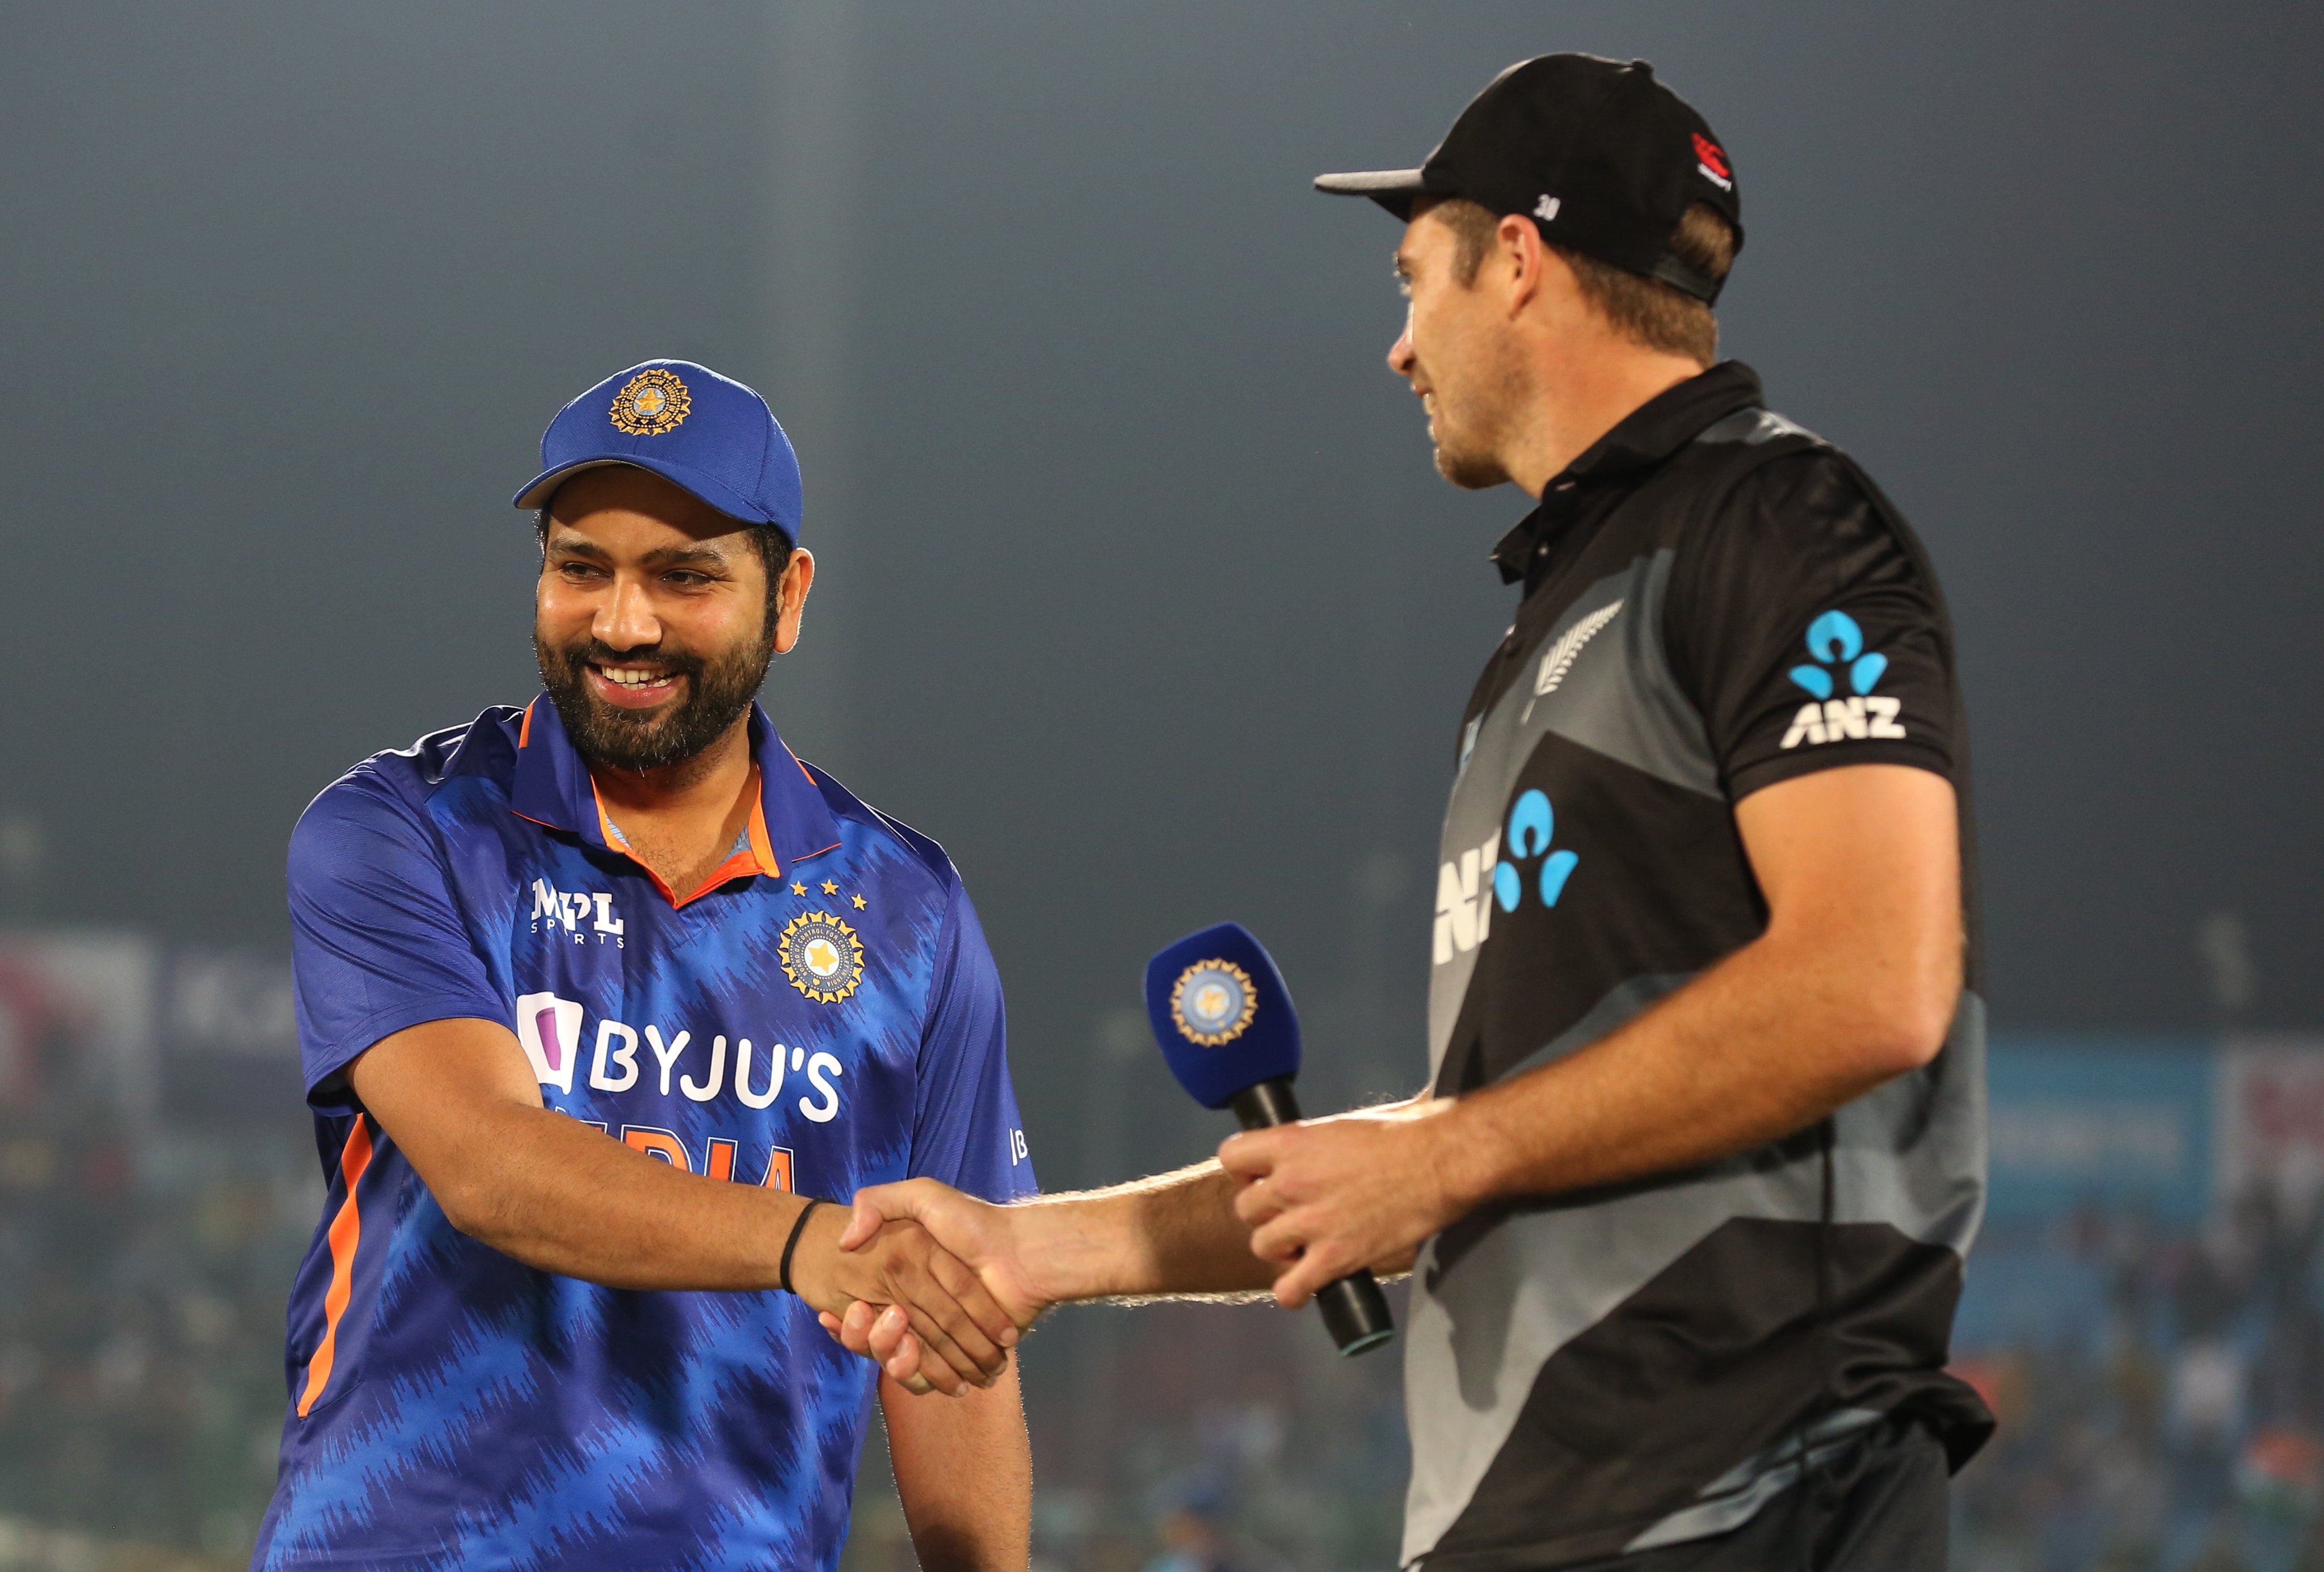 Trent Boult knows my weakness, says Rohit Sharma after IND beat NZ